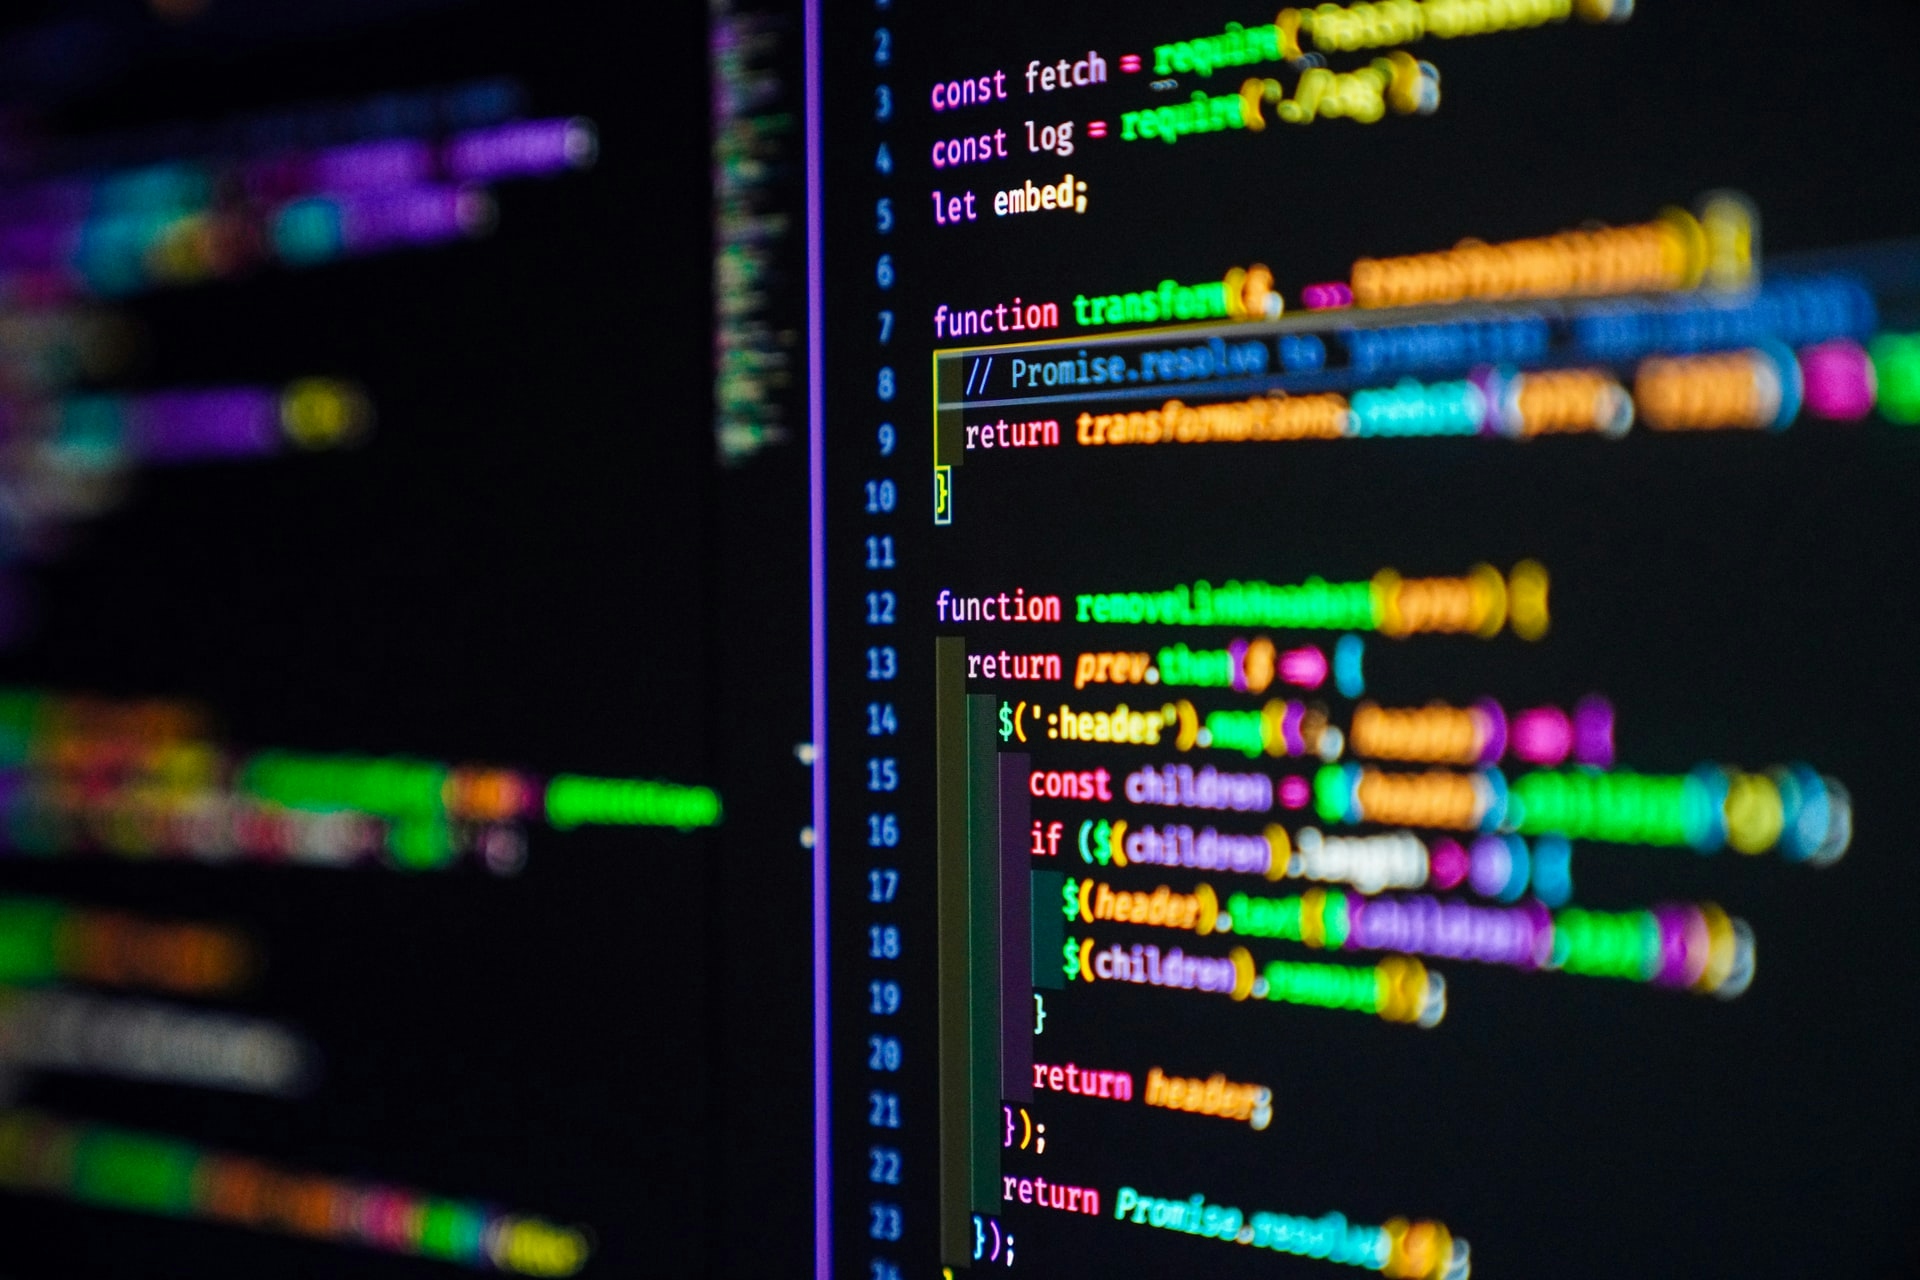 Colorful JavaScript code on the monitor screen